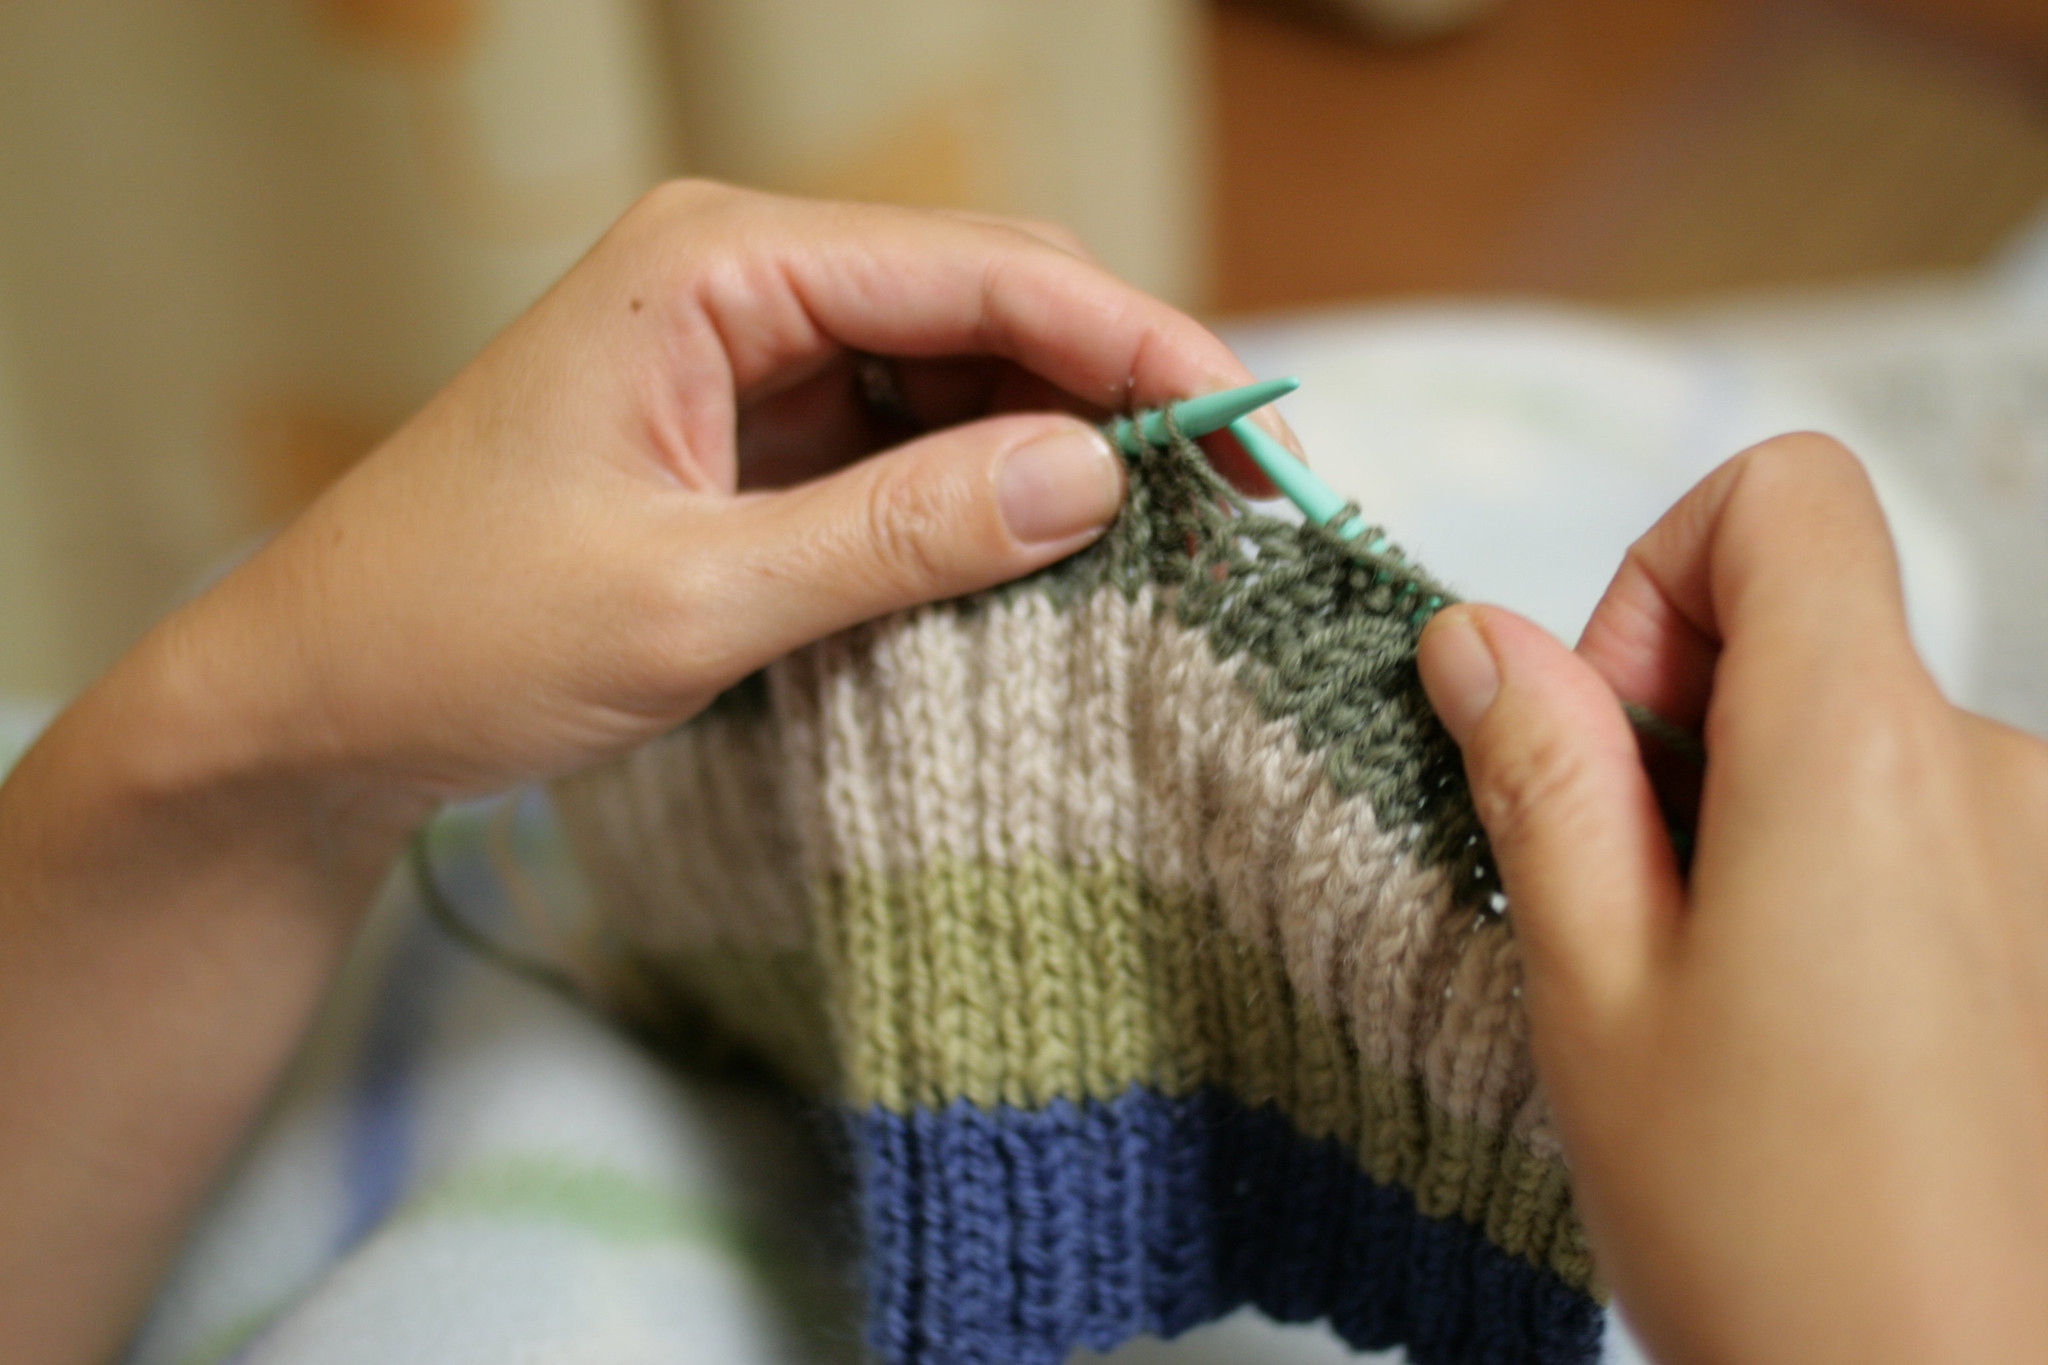 A close-up of hands holding knitting needles creating a striped knit item.